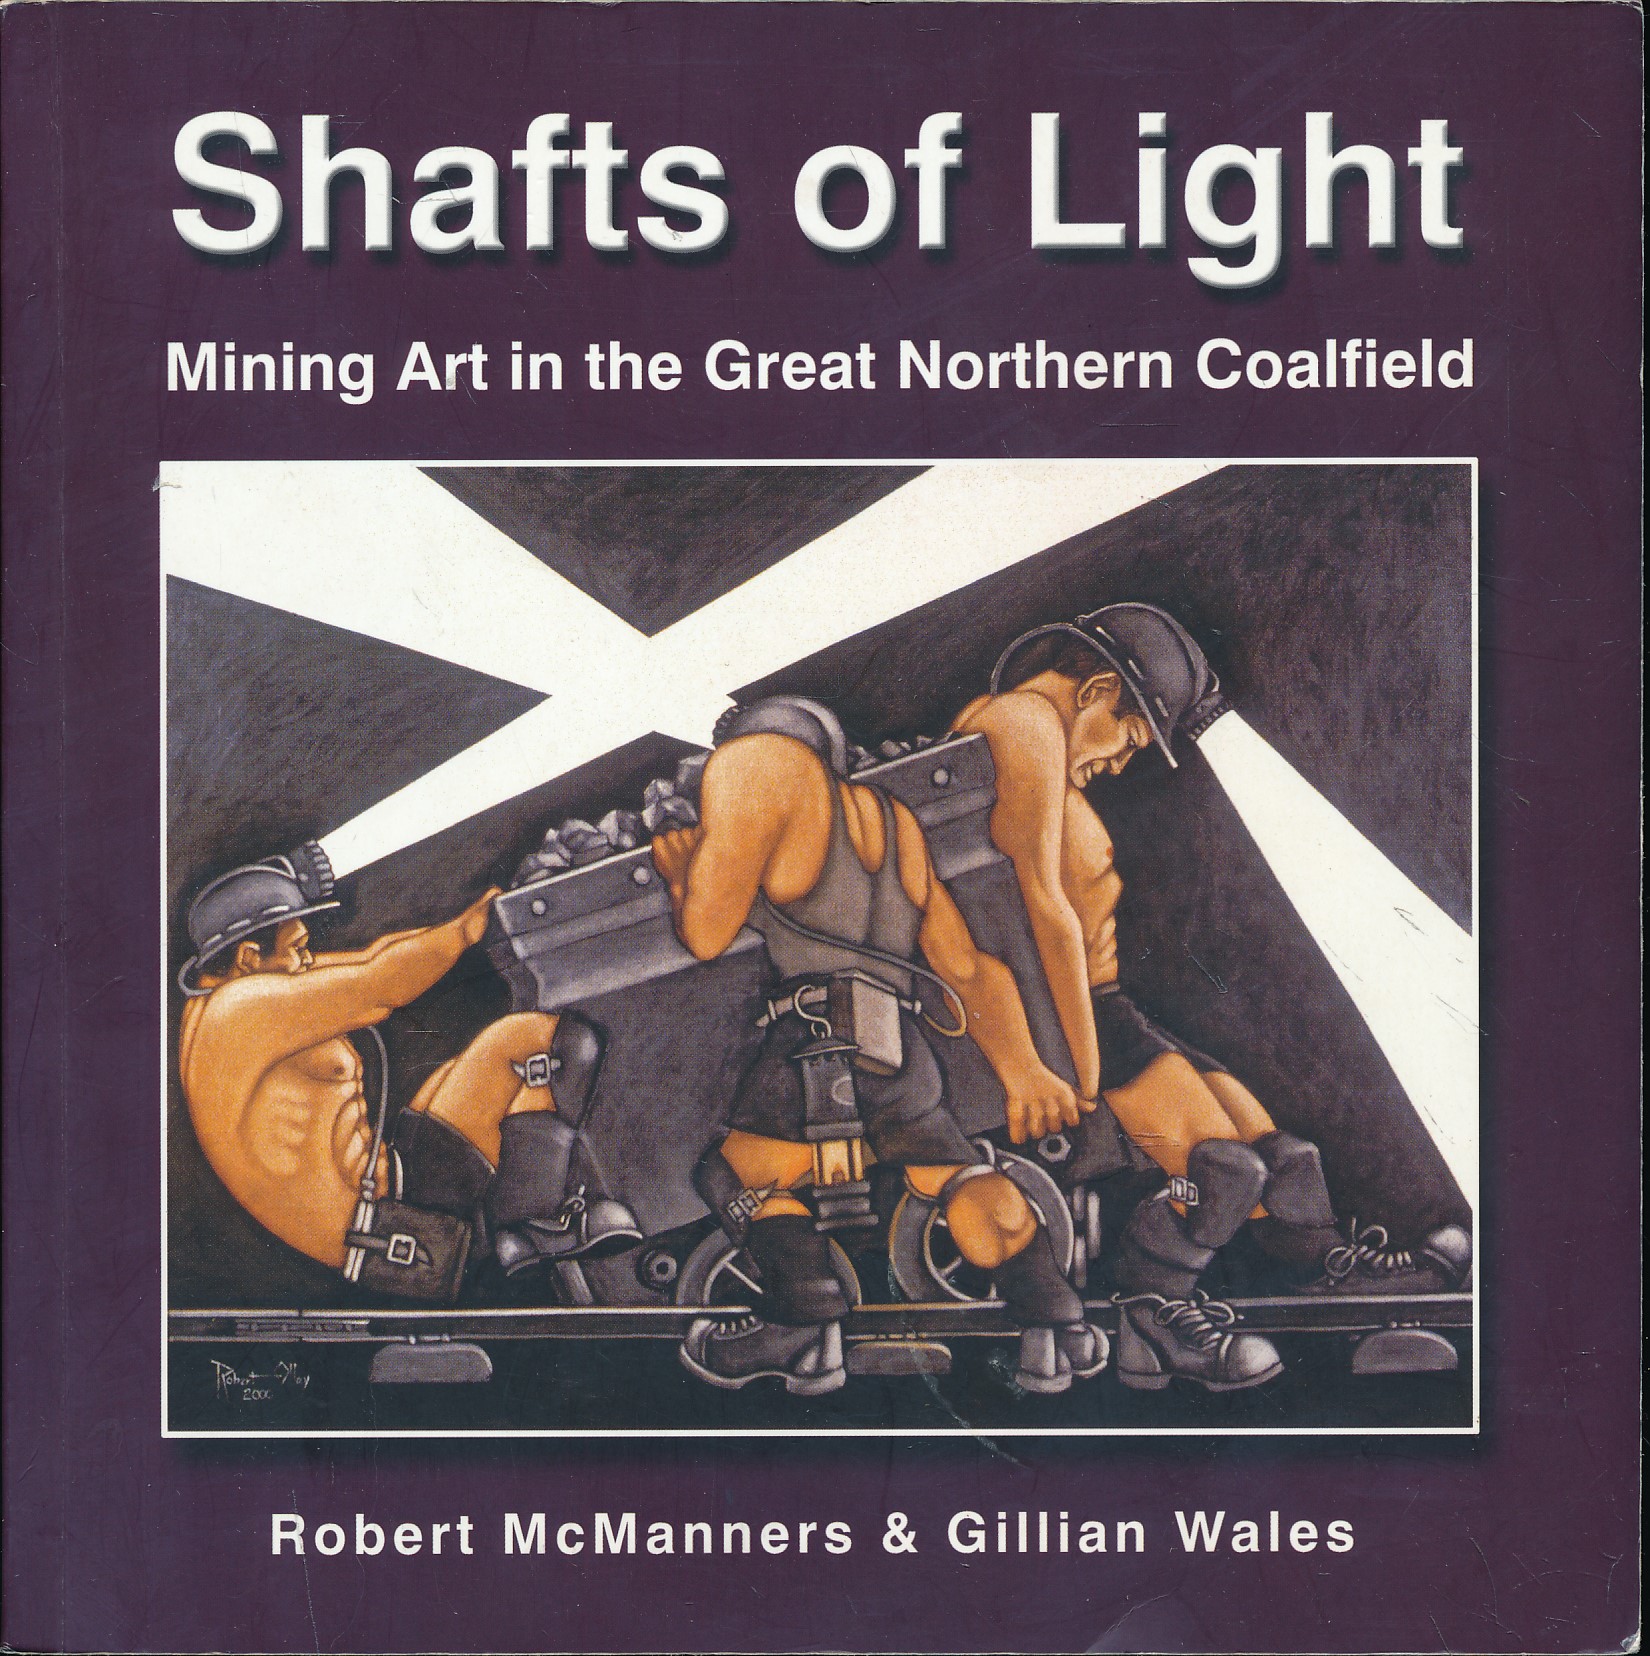 Shafts of Light: Mining Art in the Great Northern Coalfield. Signed copy.